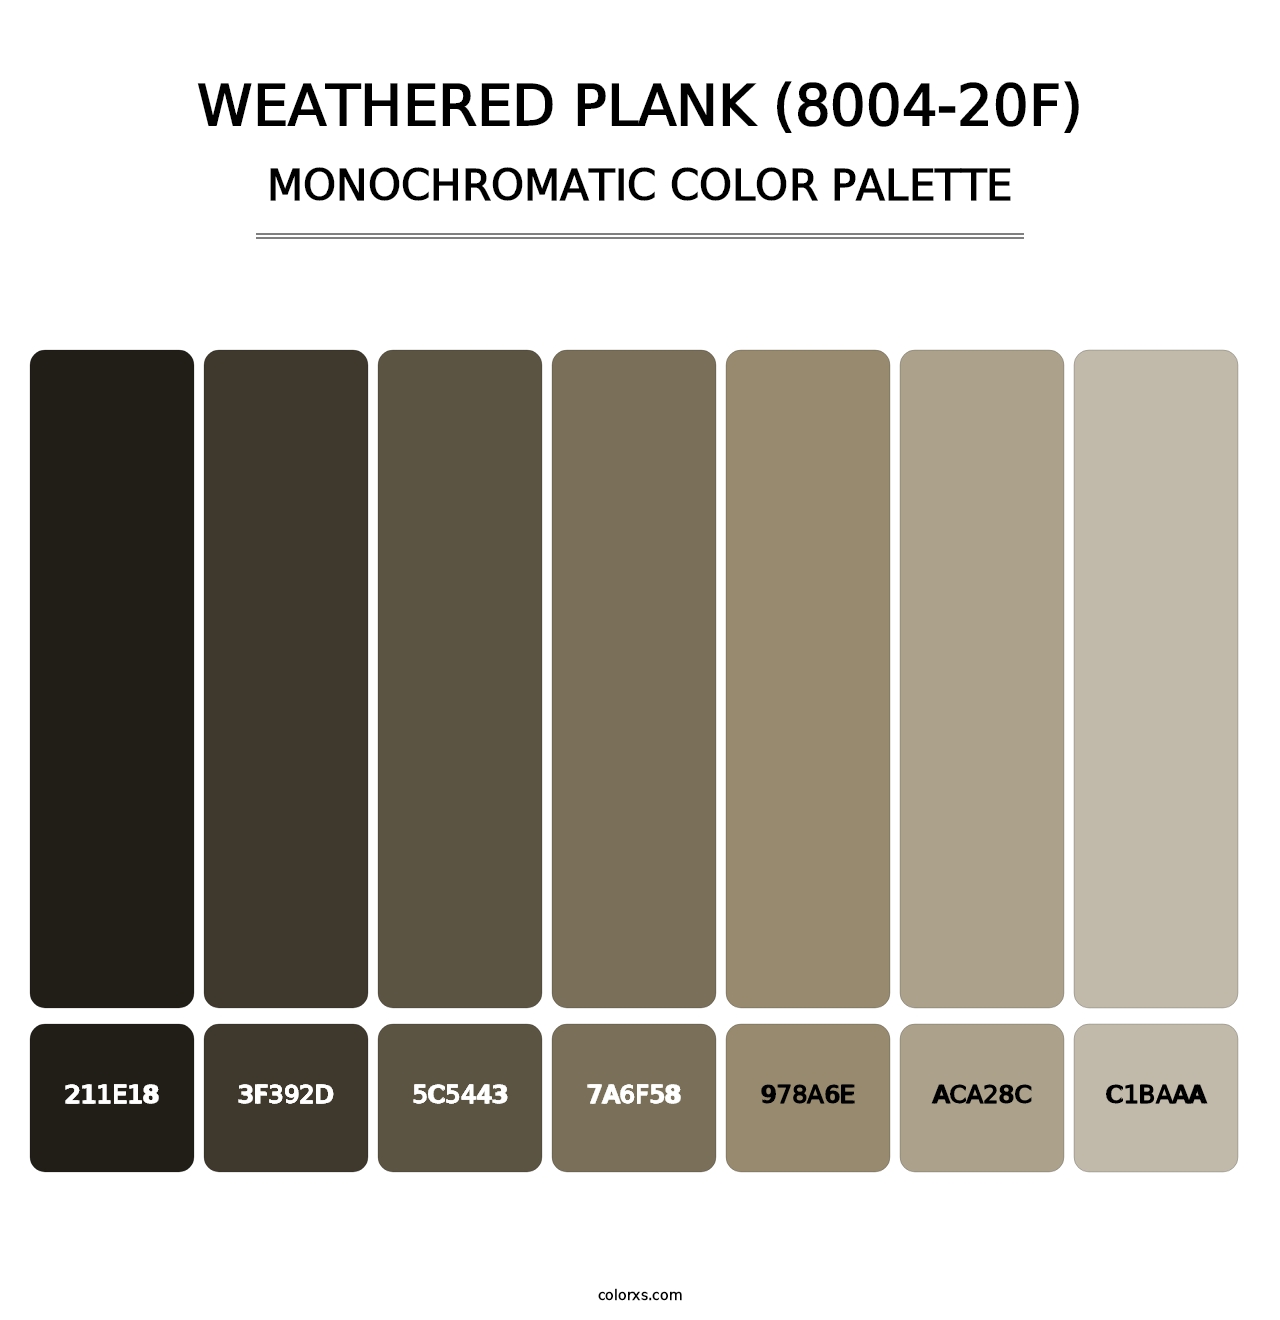 Weathered Plank (8004-20F) - Monochromatic Color Palette